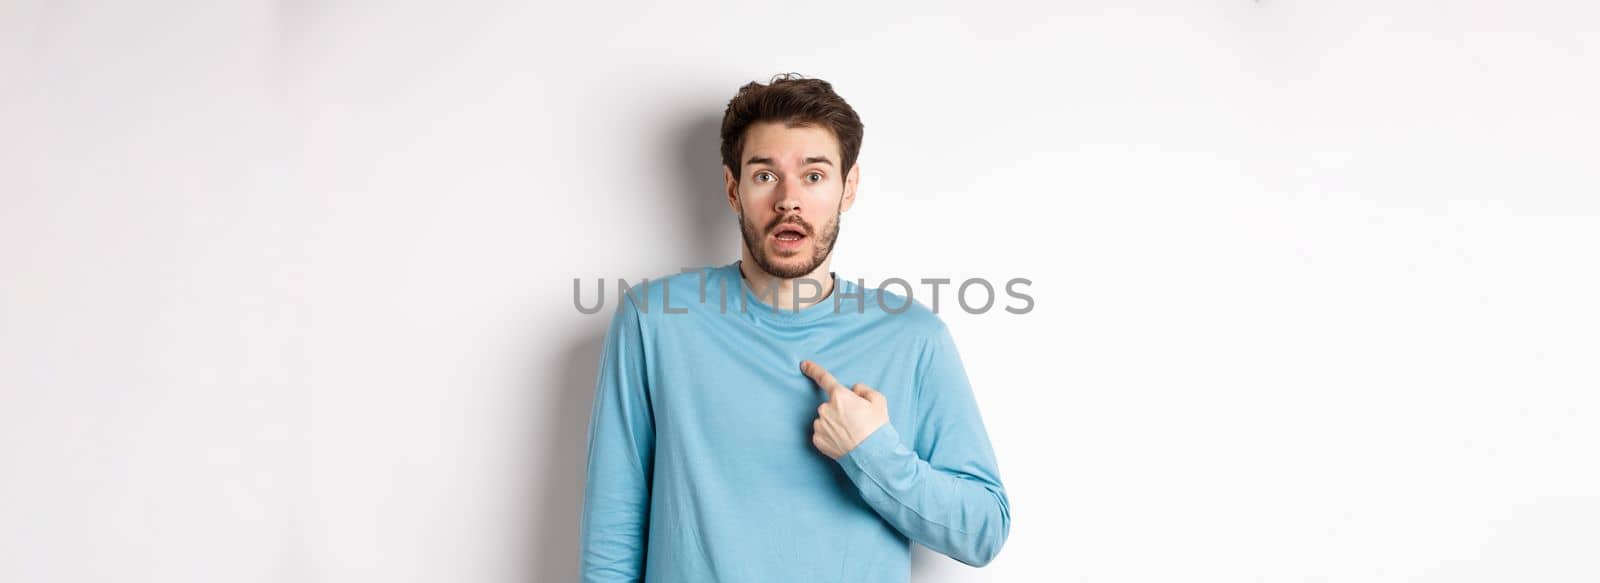 Surprised young man gasping and pointing at himself with disbelief, being chosen or named, standing over white background.